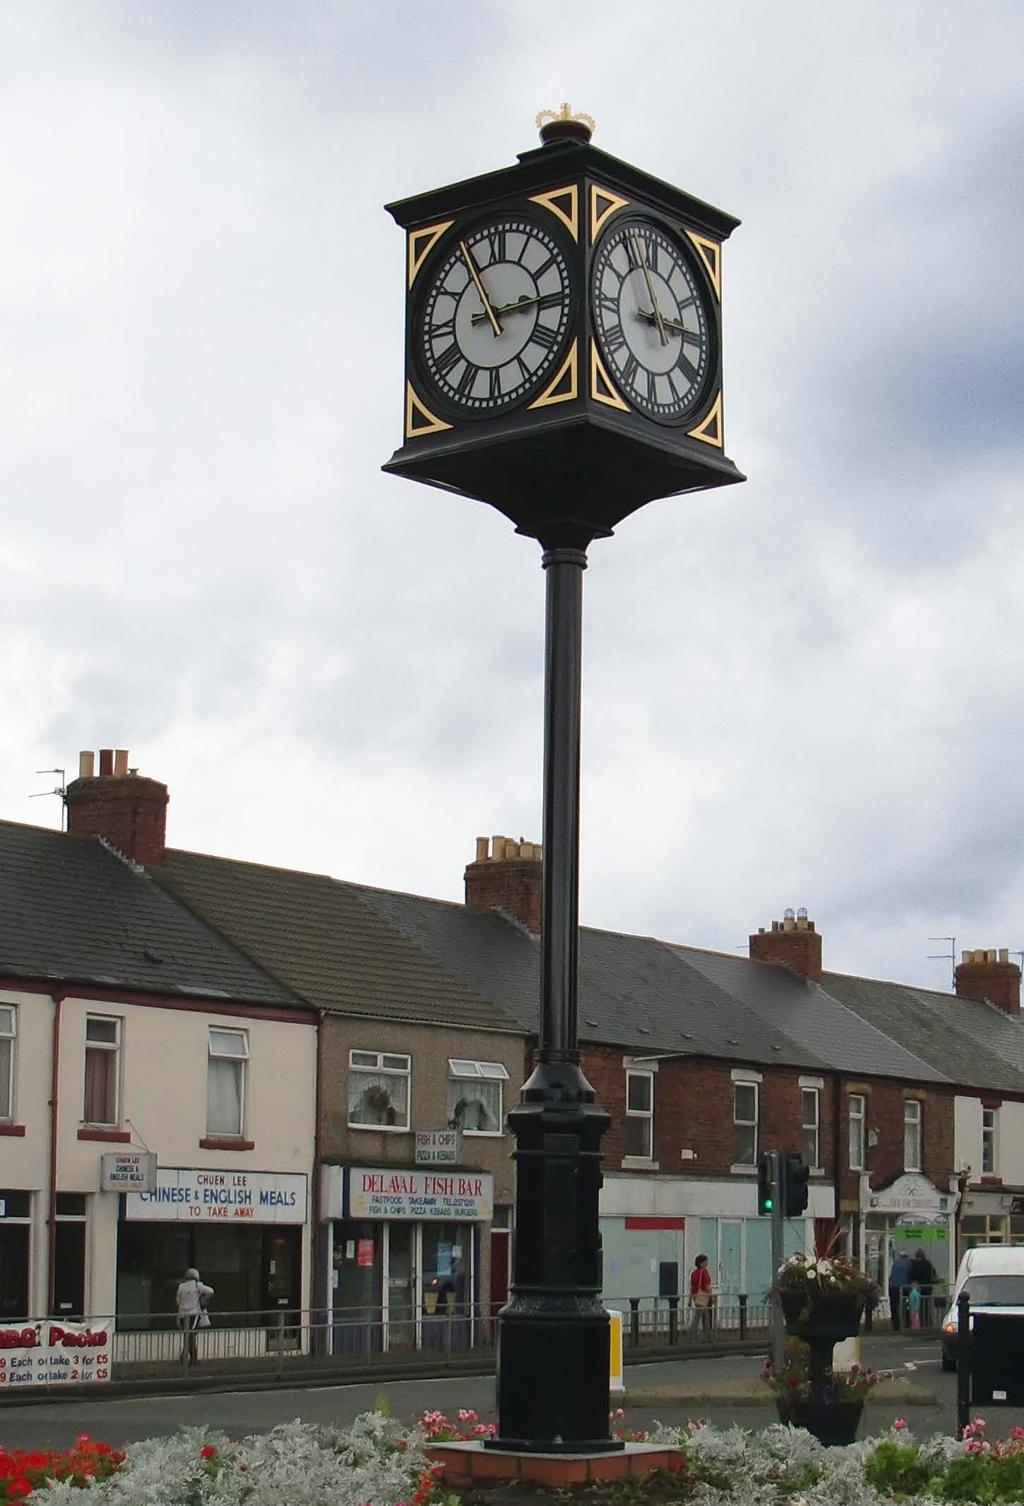 A pillar clock can bring together a local community to contribute ideas to help